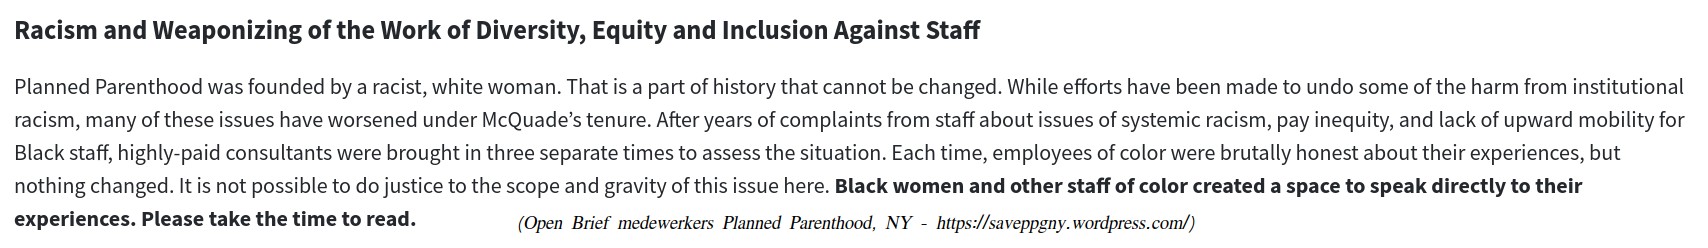 open brief planned parenthood over racism